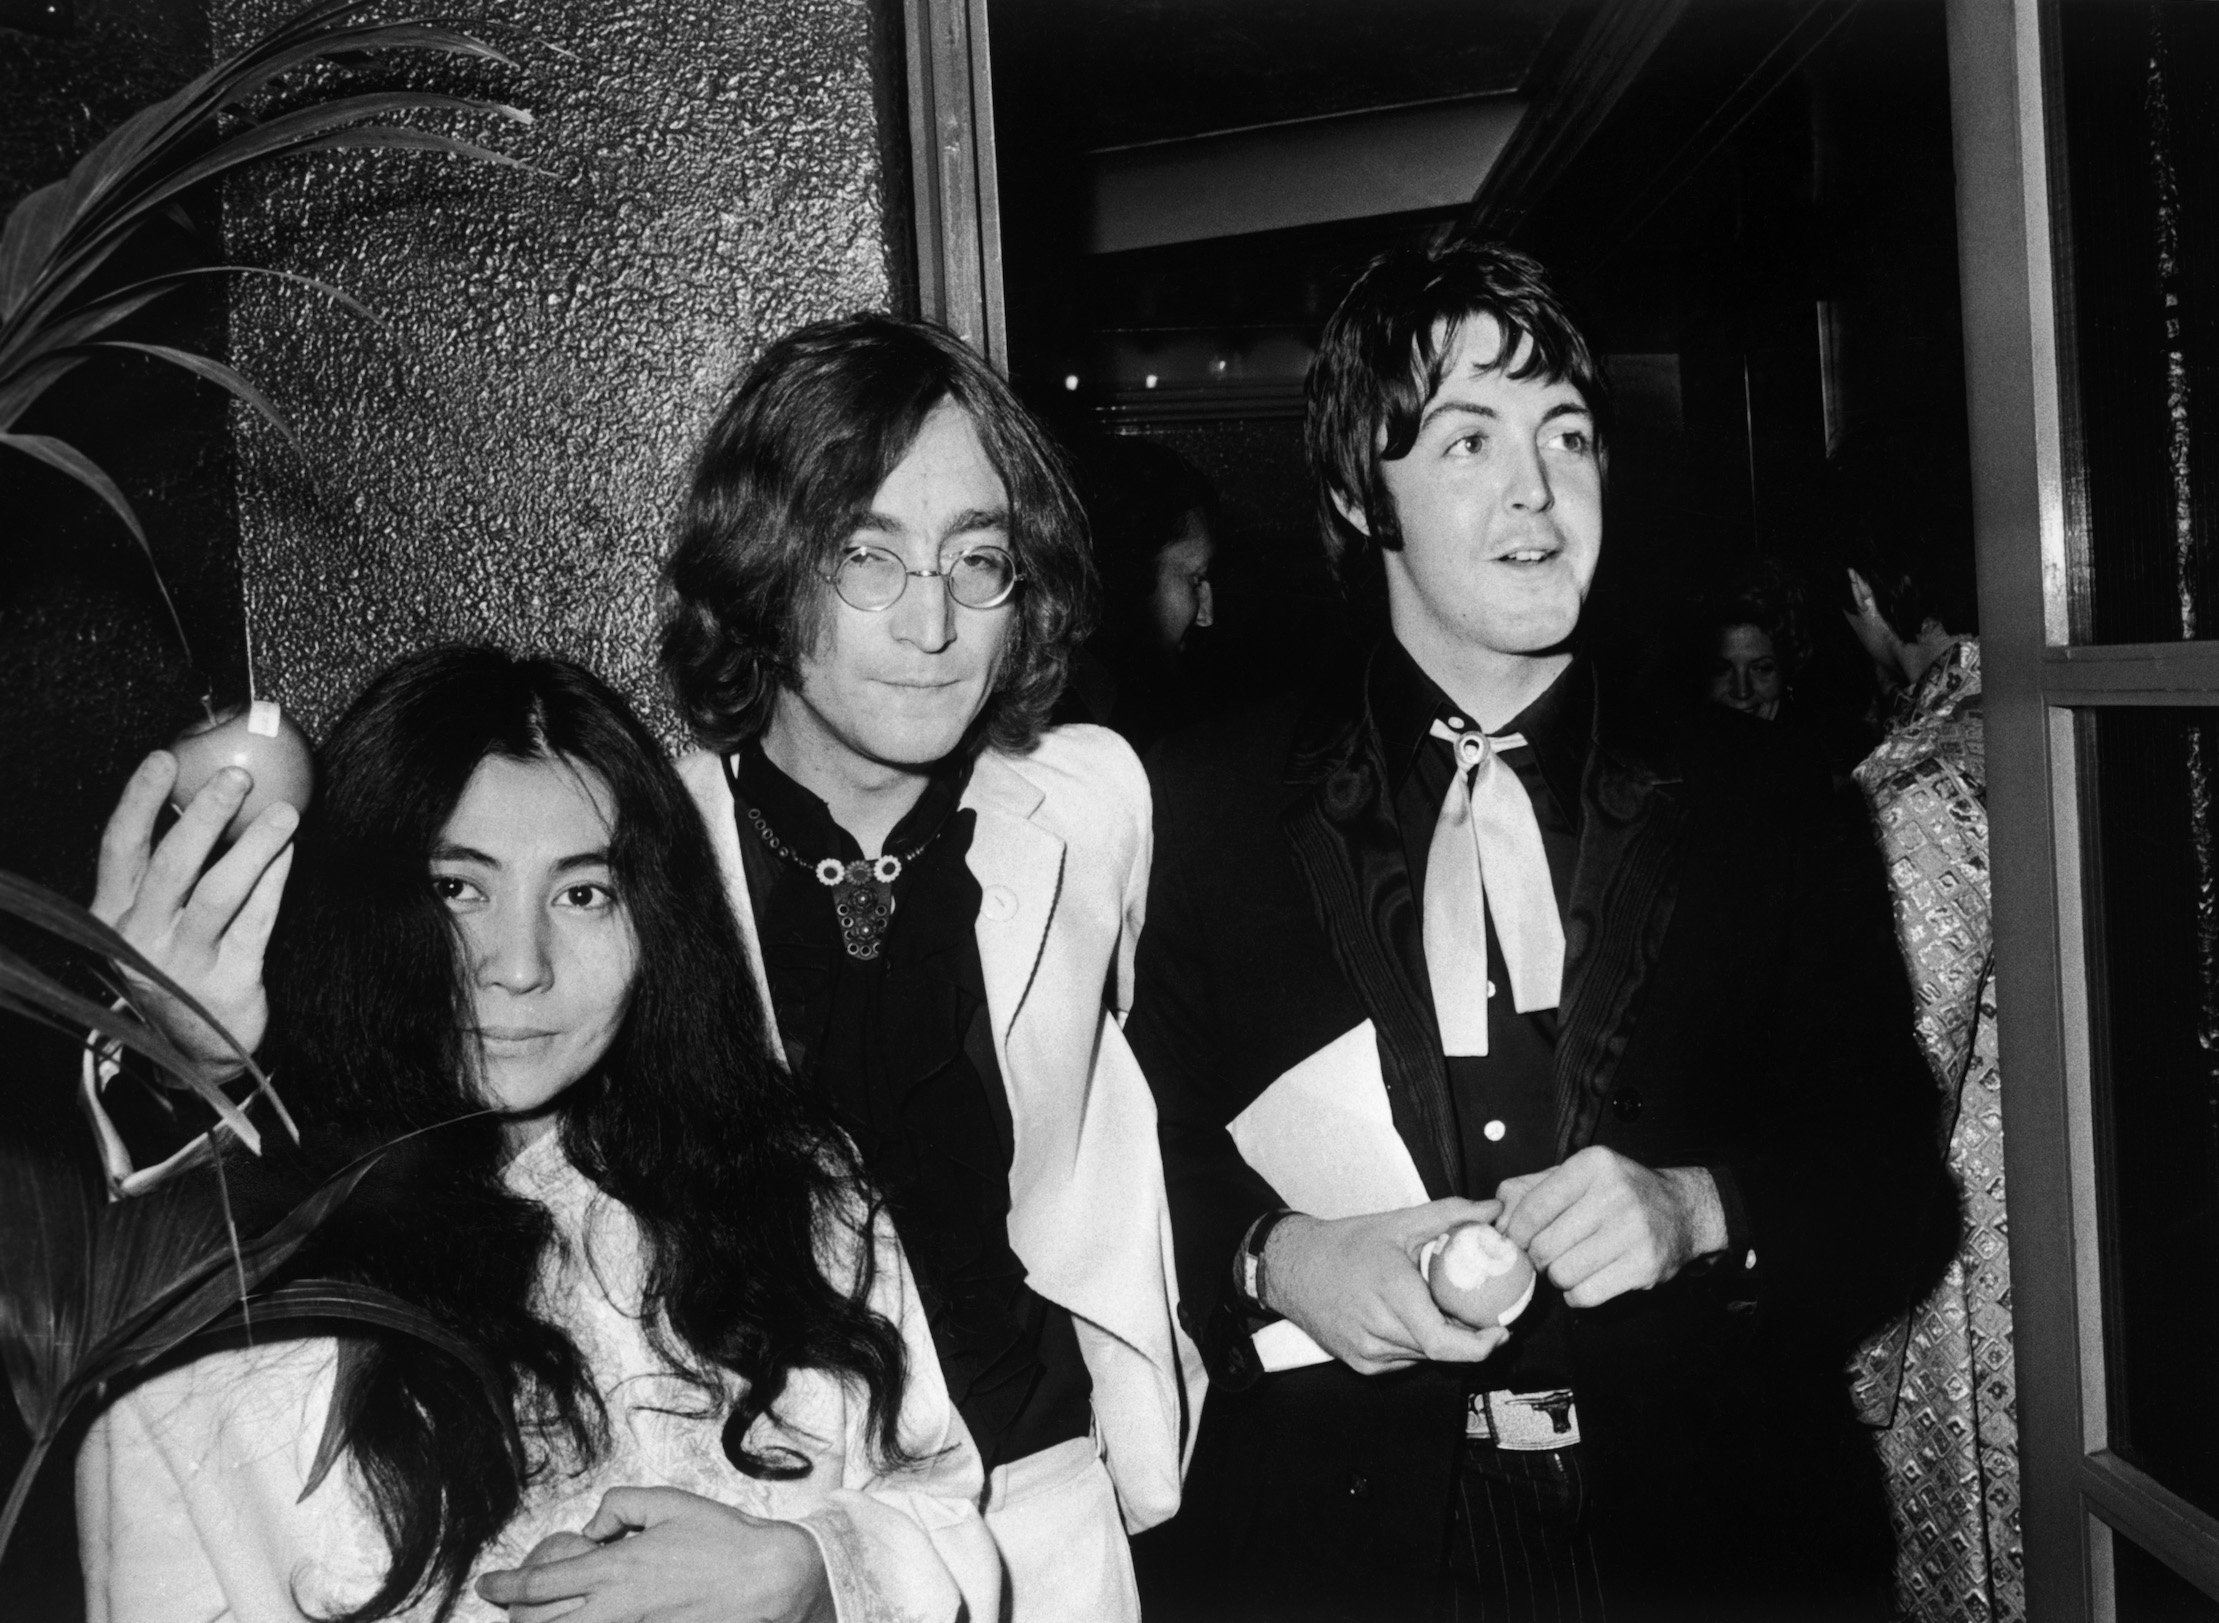 Yoko Ono, John Lennon, and Paul McCartney attend the premiere of Yellow Submarine at the London Pavilion in 1968